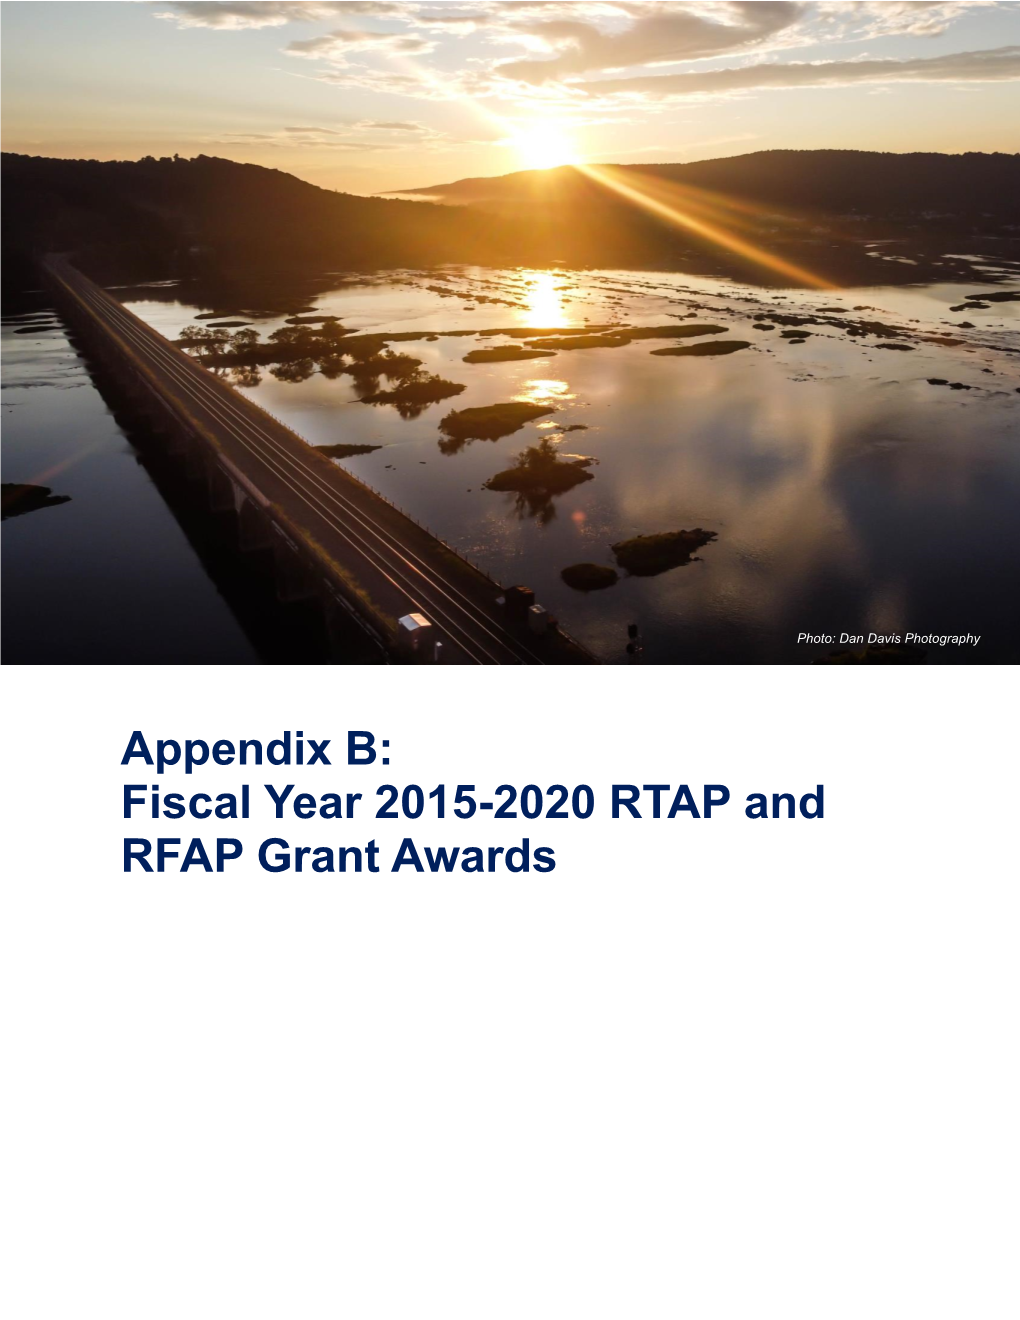 FY 2015-2020 RTAP and RFAP Grant Awards